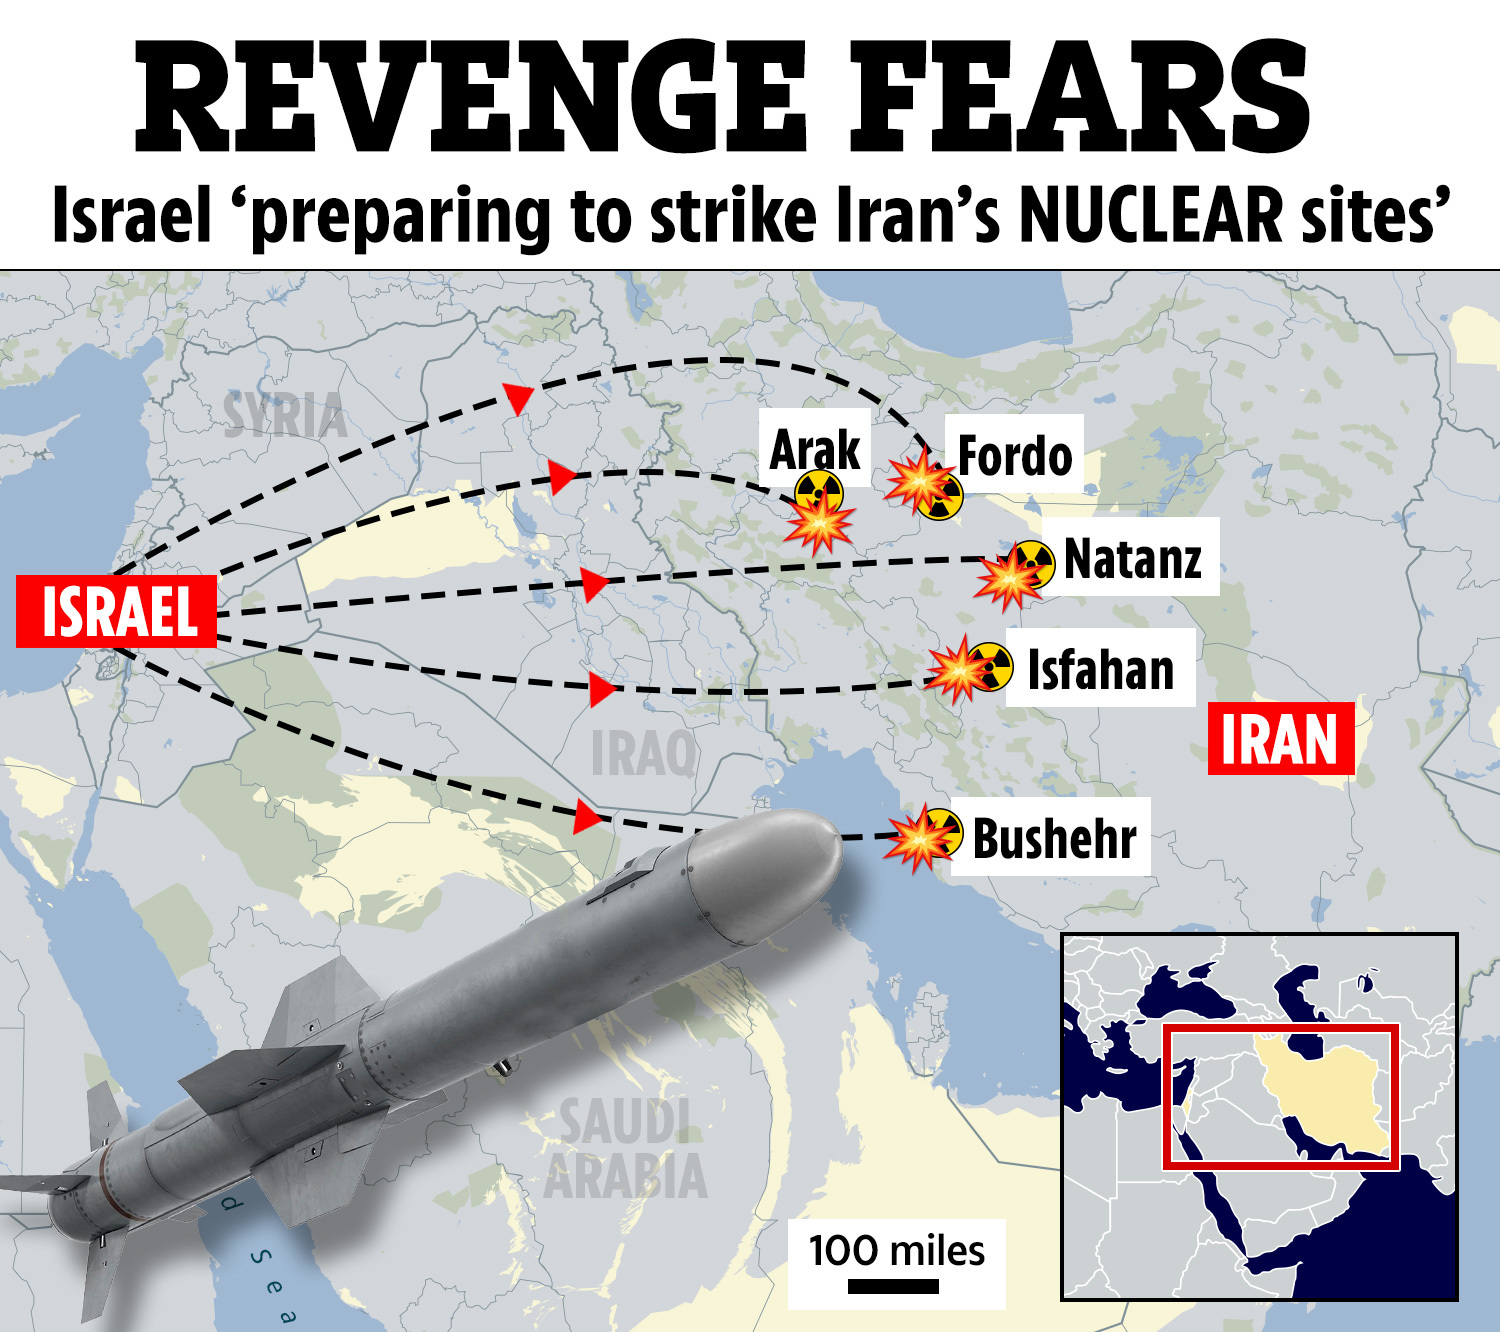 Prior to Saturday's attack, Israel was already said to be preparing a possible strike on Iran's nuke facilities